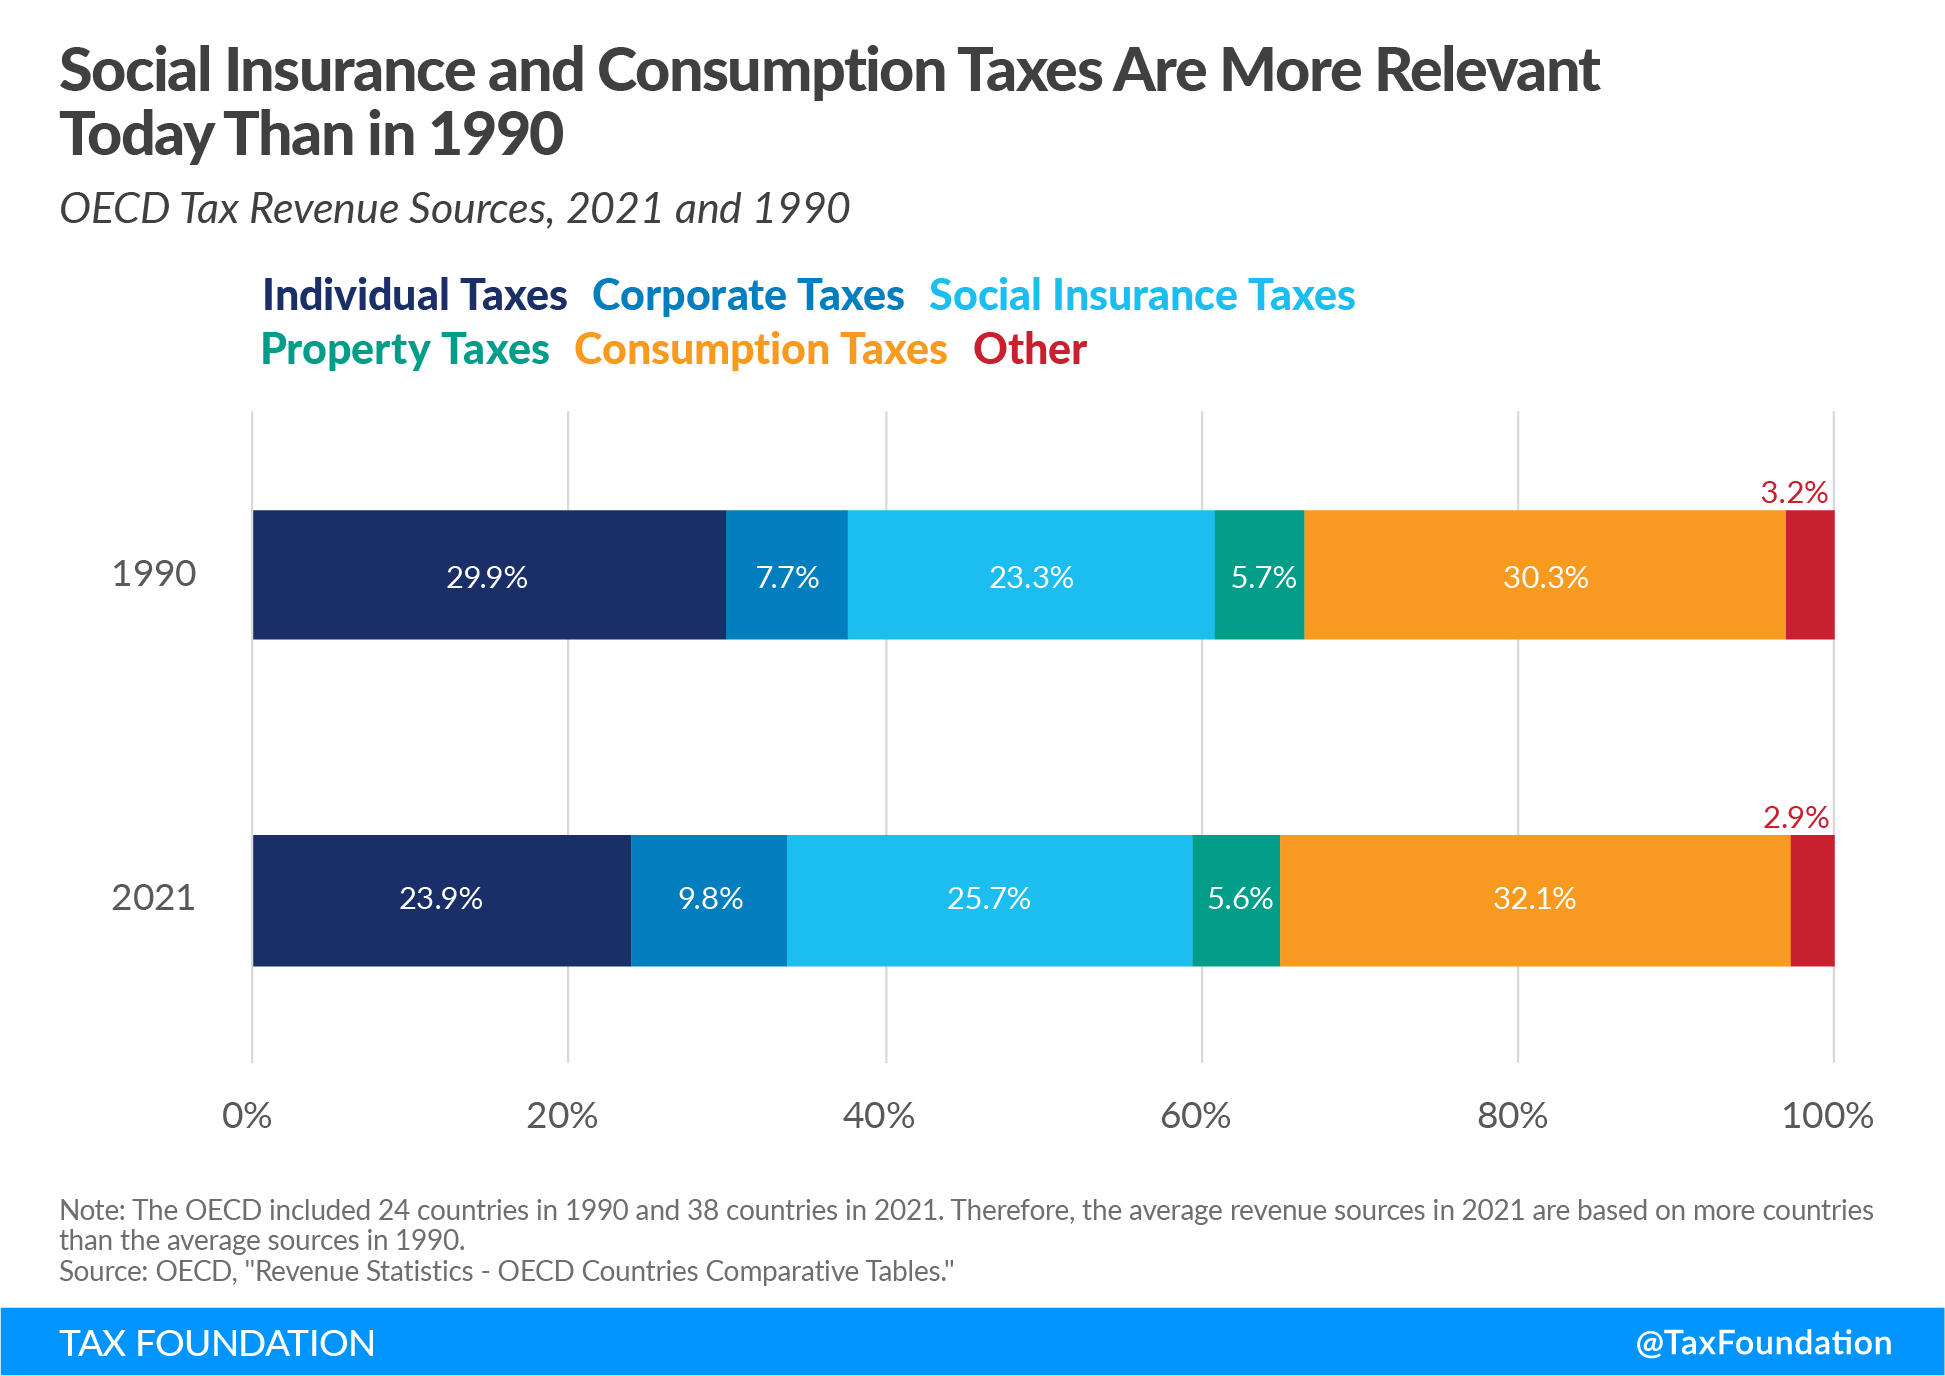 Social insurance taxes and consumption taxes are more relevant today than in 1990 tax revenue trends by country